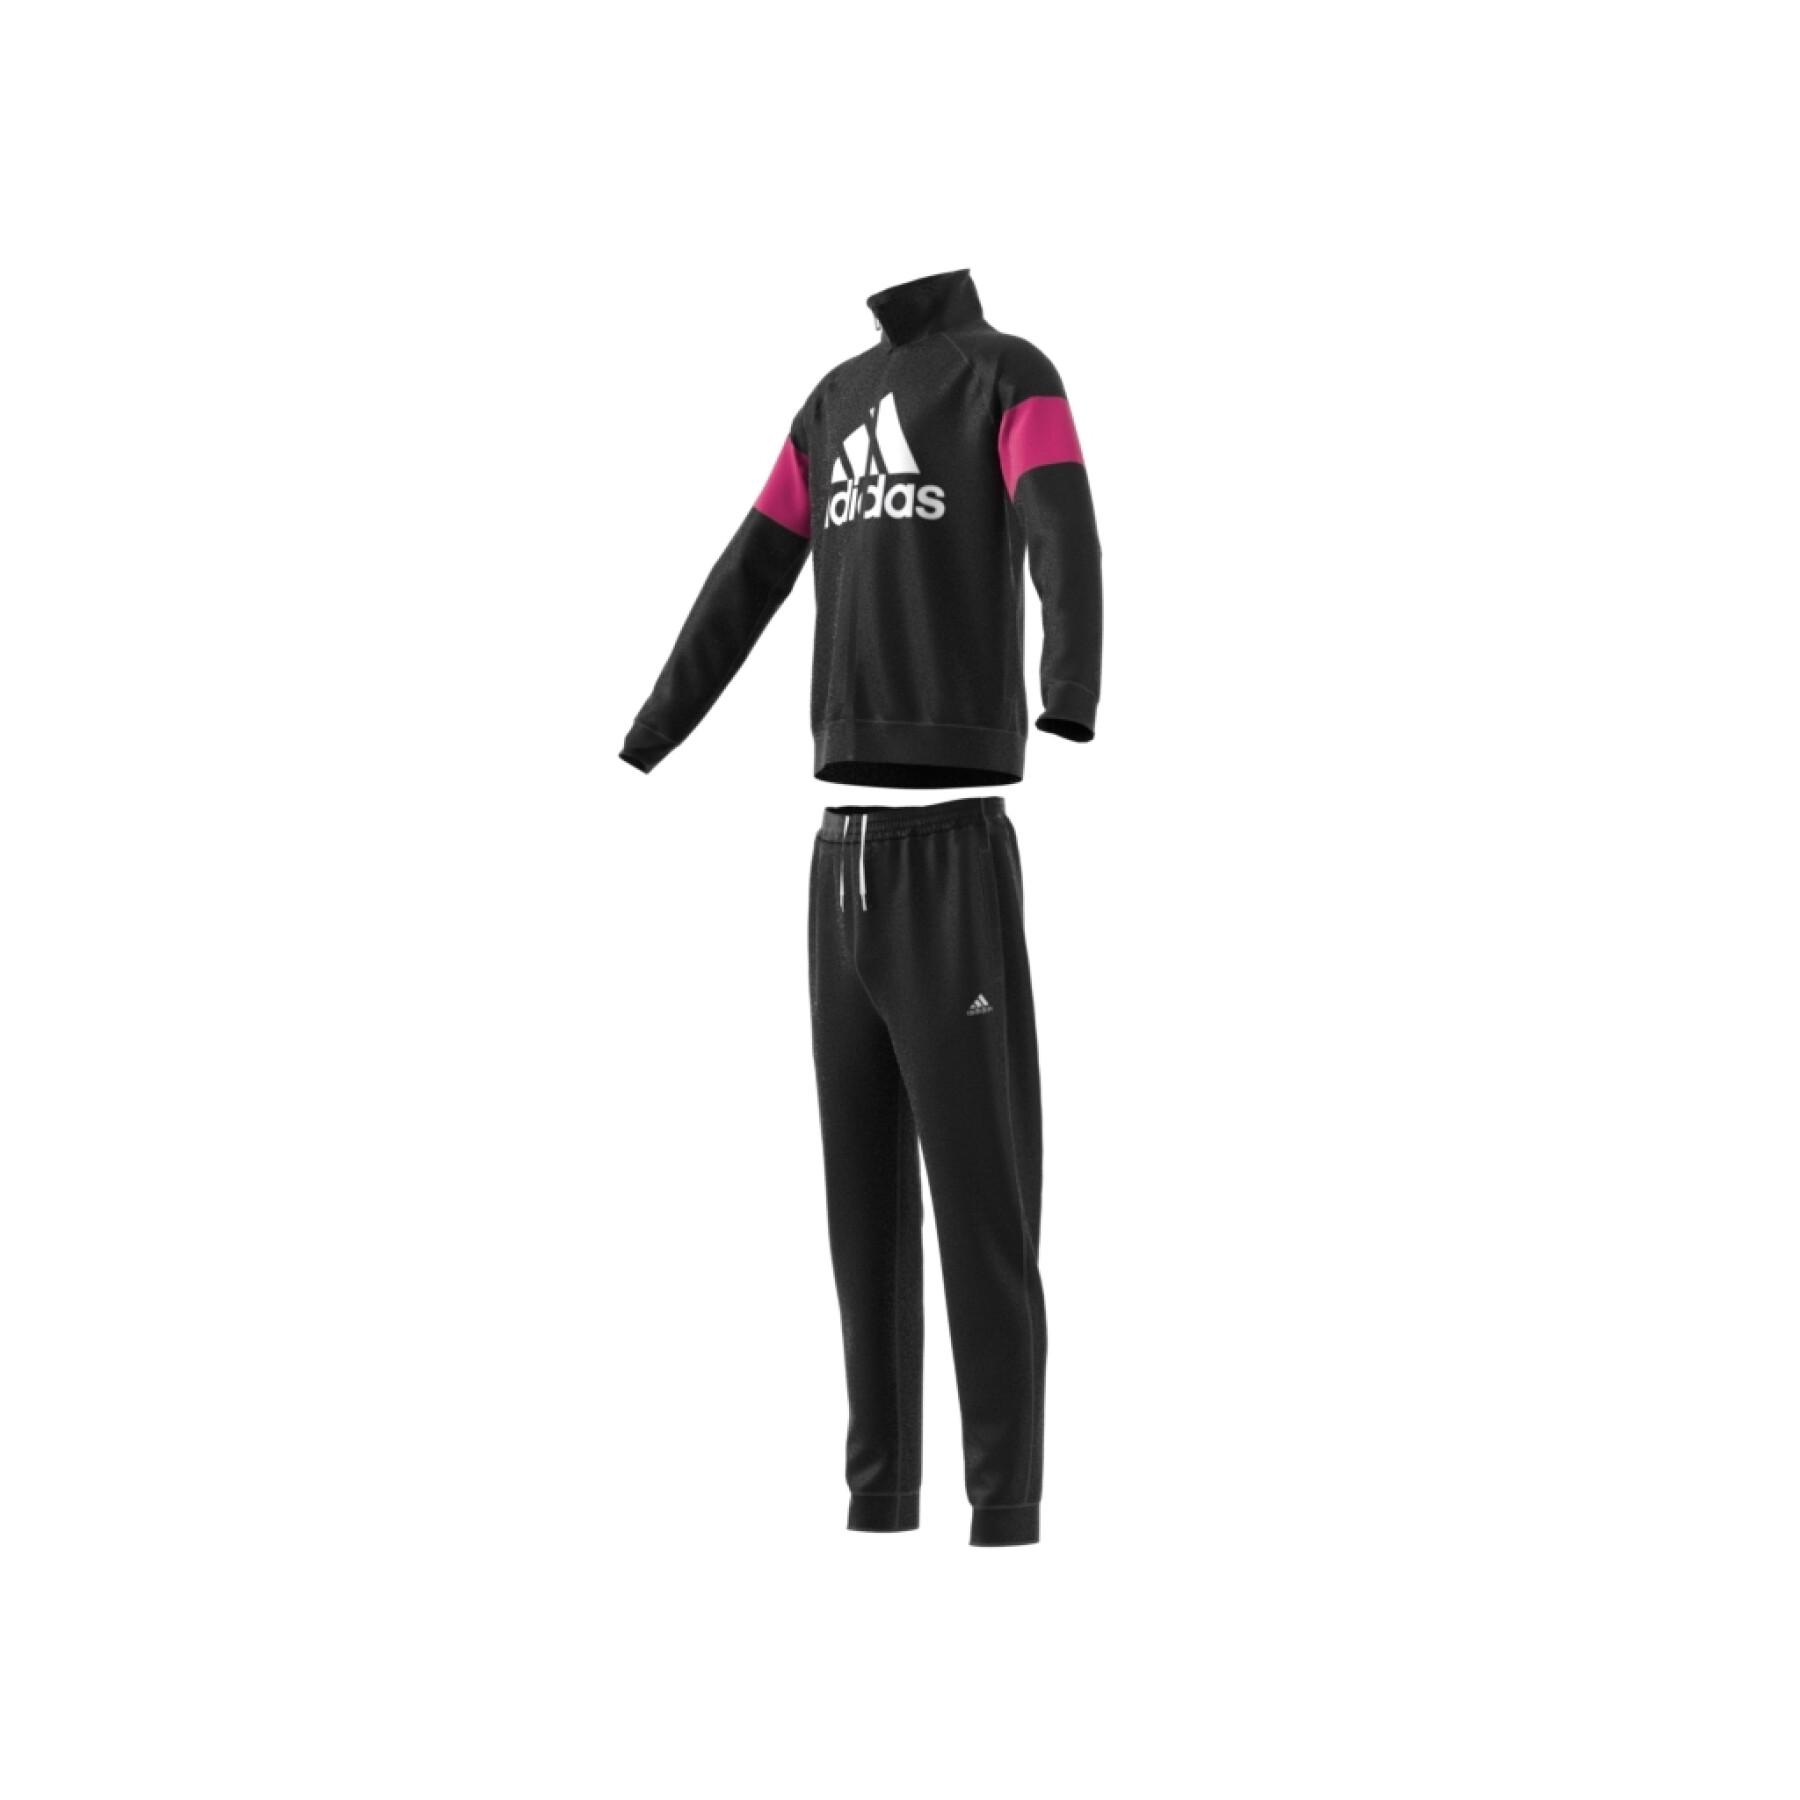 Tracksuit with girl's sports badge adidas